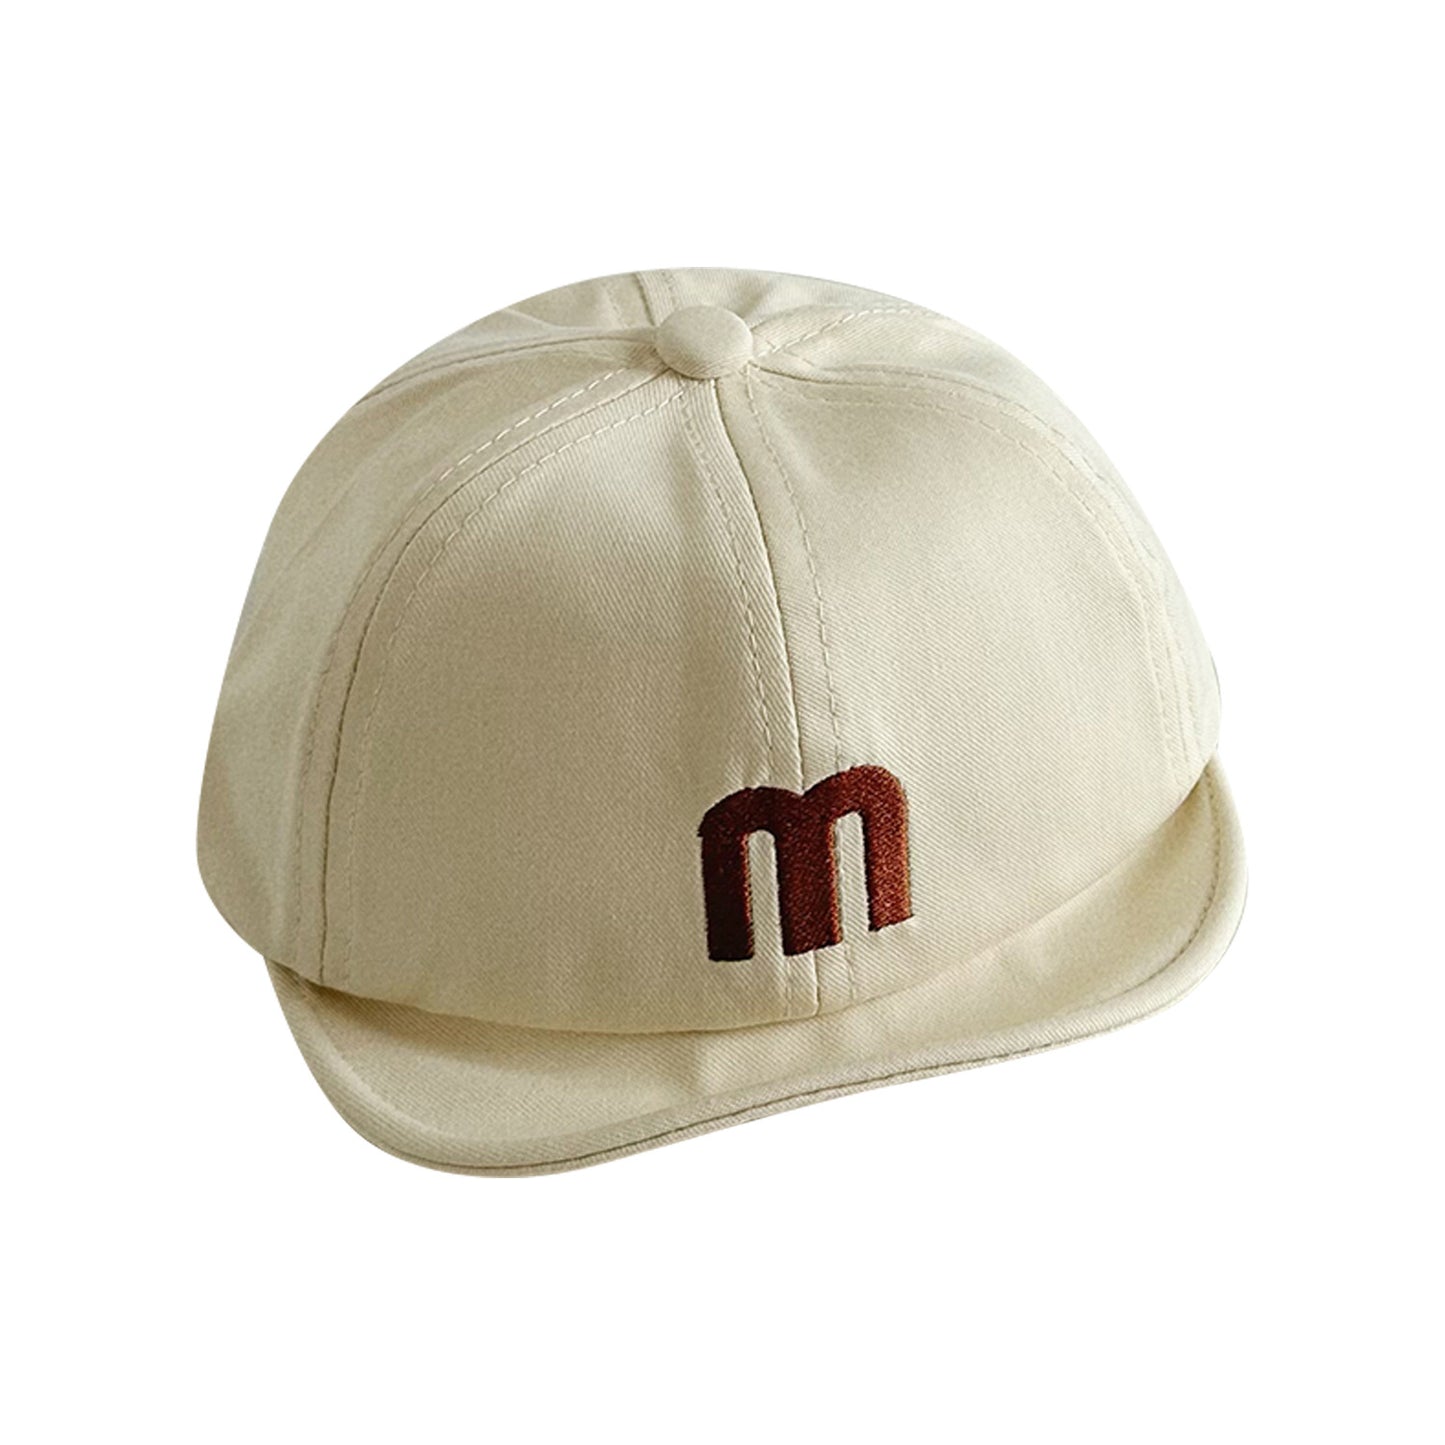 Soft and cute ~ Embroidered baby baseball cap with letter m for boys and girls in spring and summer, versatile soft brim children's sun protection hat